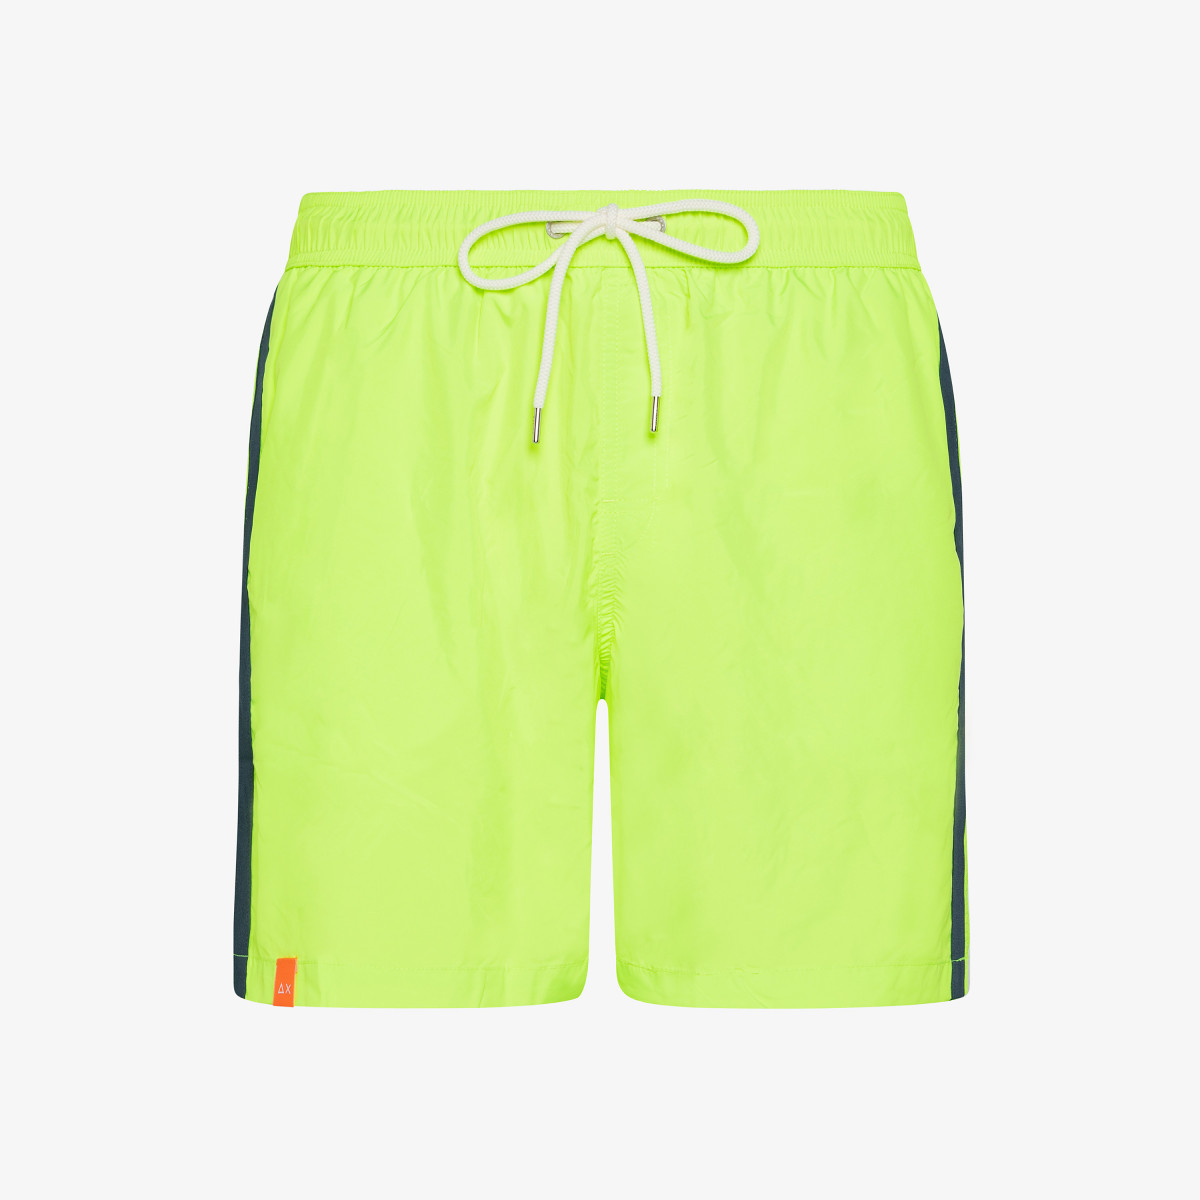 SWIM PANT STRIPE COLOR ON SIDE YELLOW FLUO